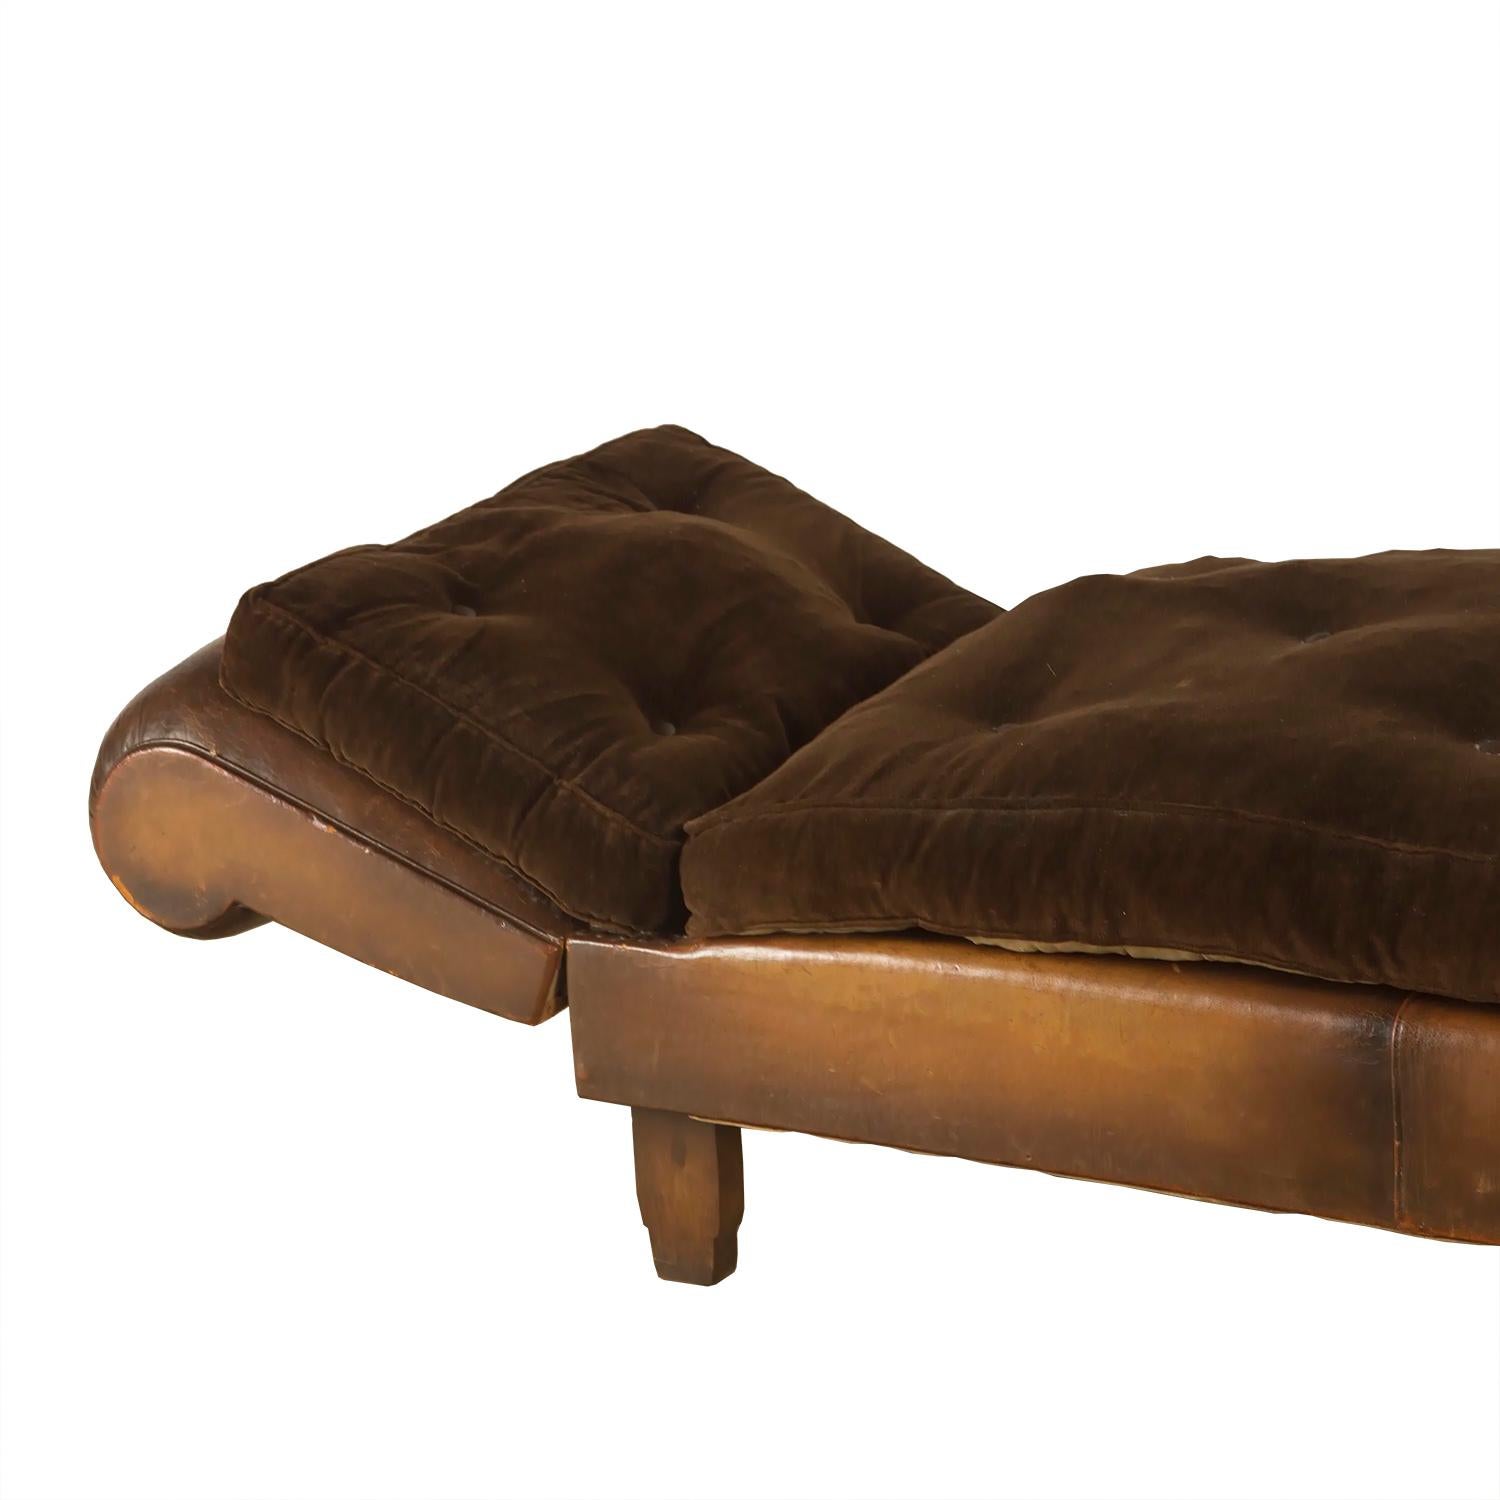 A French leather daybed that also makes a useful sofa. The sides can be dropped to make a daybed. The cushions are upholstered in rich brown velvet.